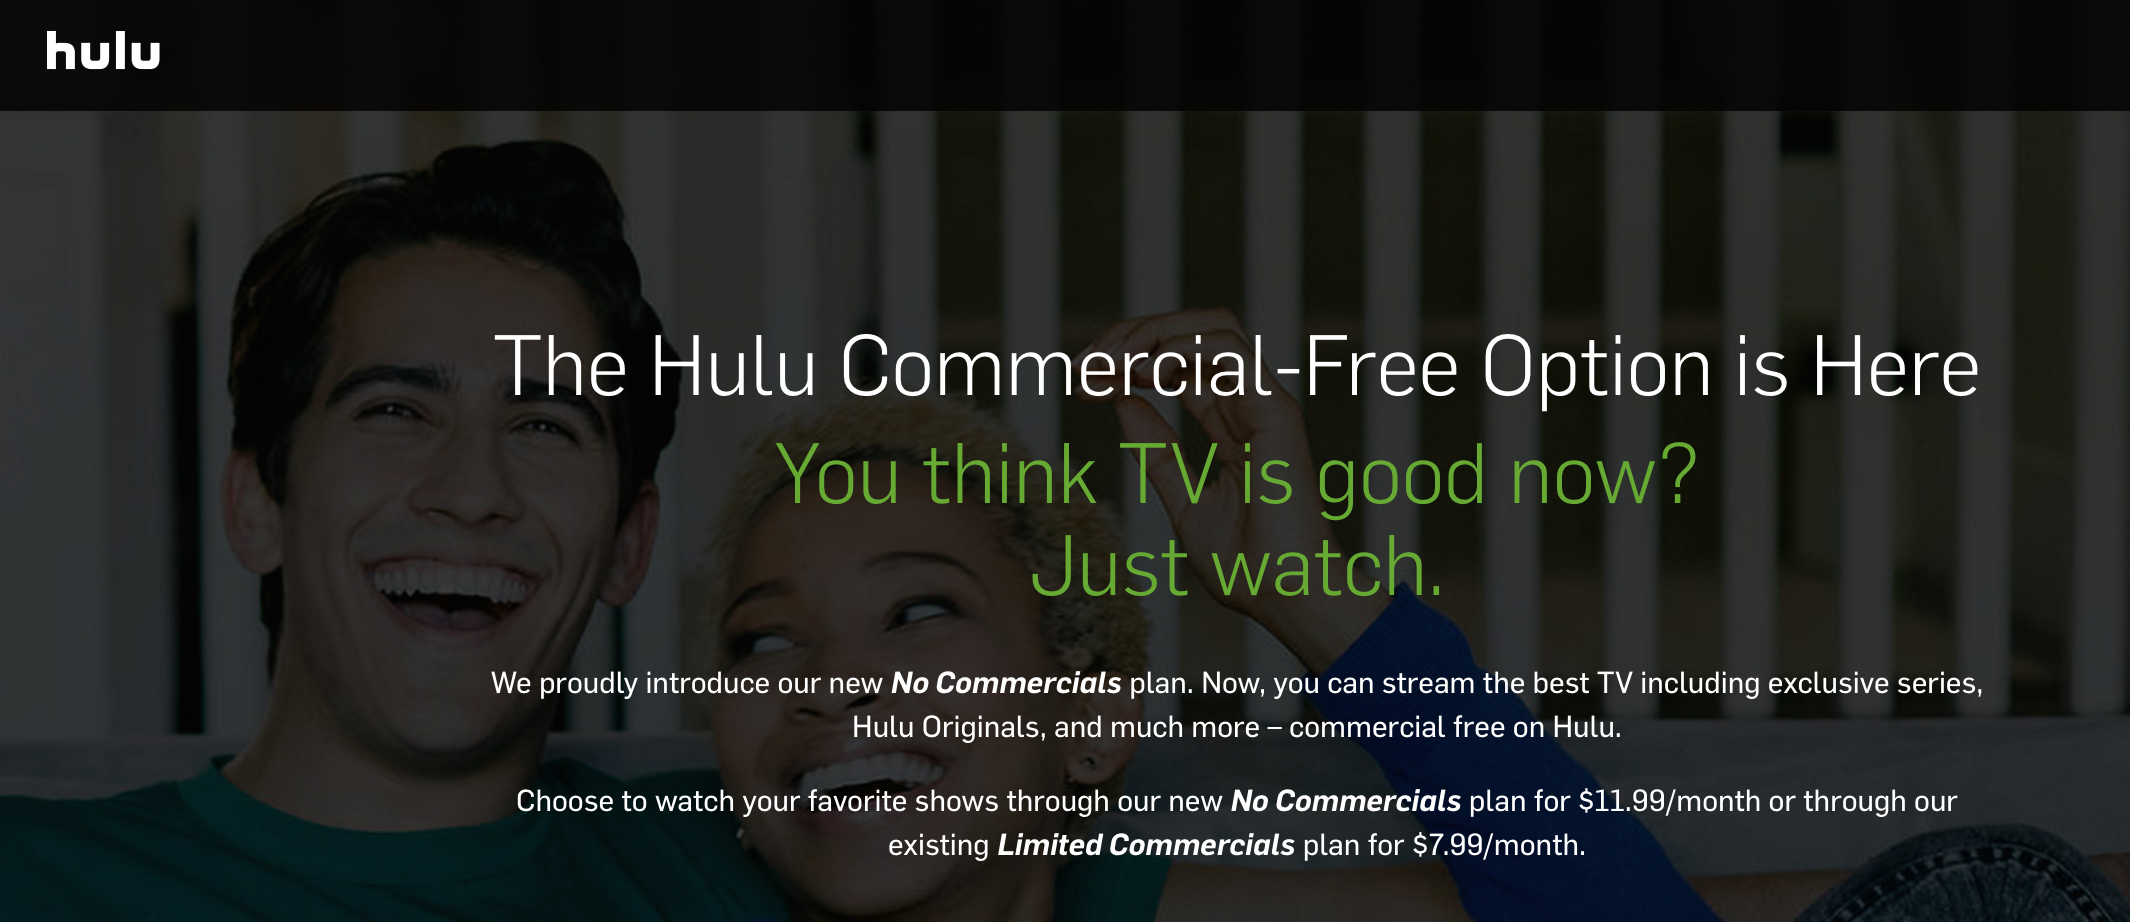 Hulu Finally Offers Ad-Free Option For $12/Month